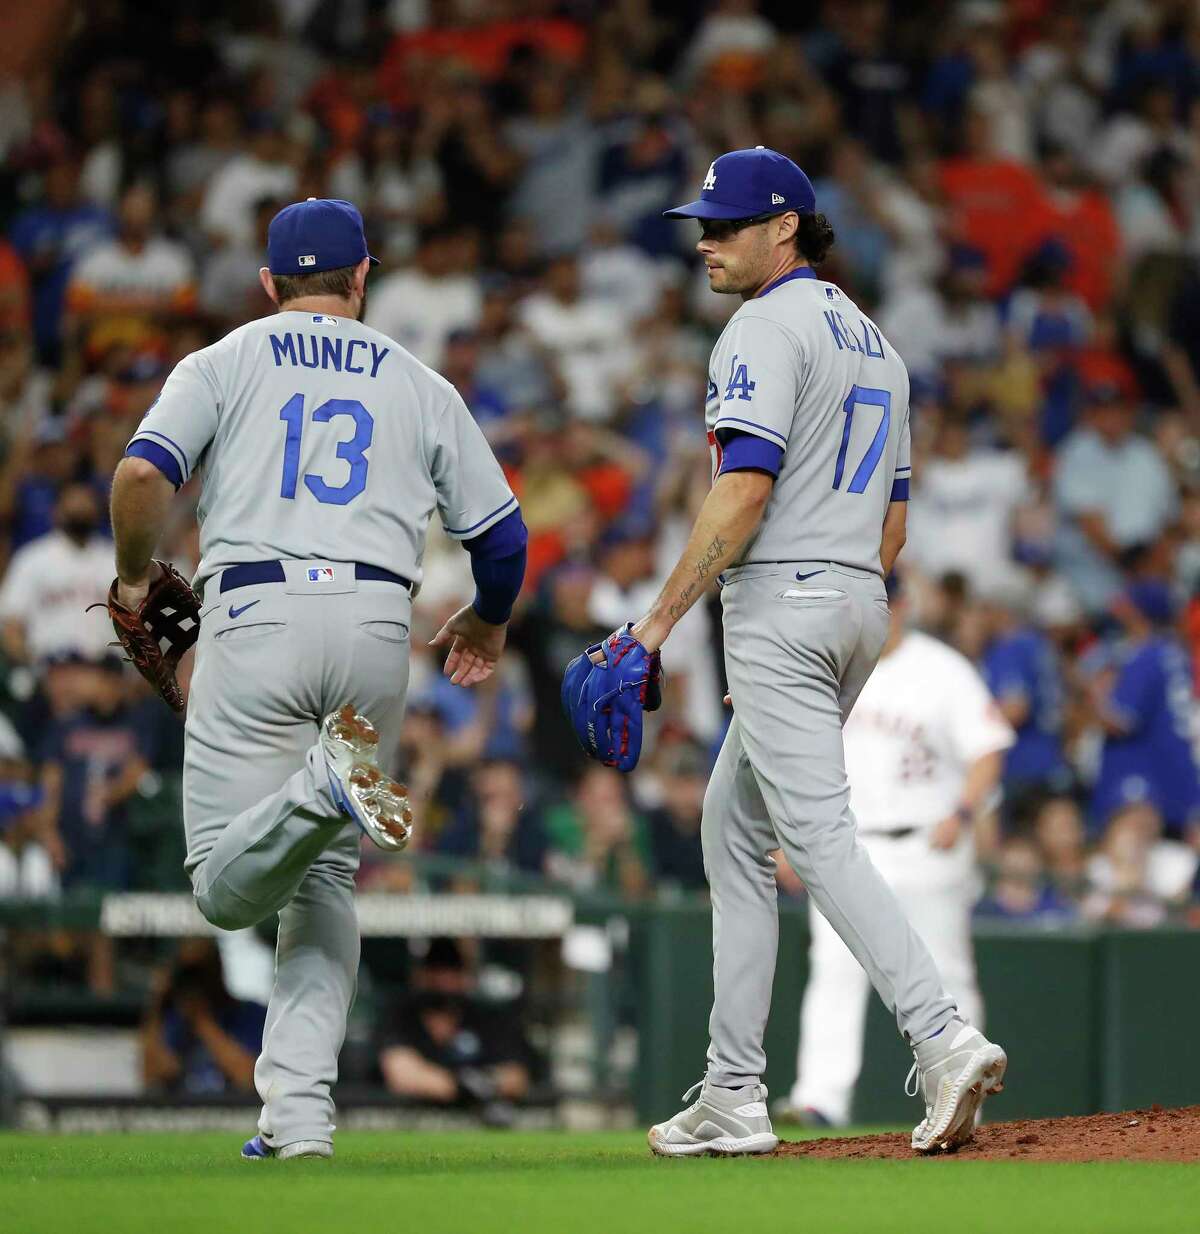 Los Angeles Dodgers relief pitcher Joe Kelly (17) chats with Max Muncy (13) after Houston Astros Jose Altuve ground out to end the eighth inning of an MLB baseball game at Minute Maid Park, Tuesday, May 25, 2021, in Houston.